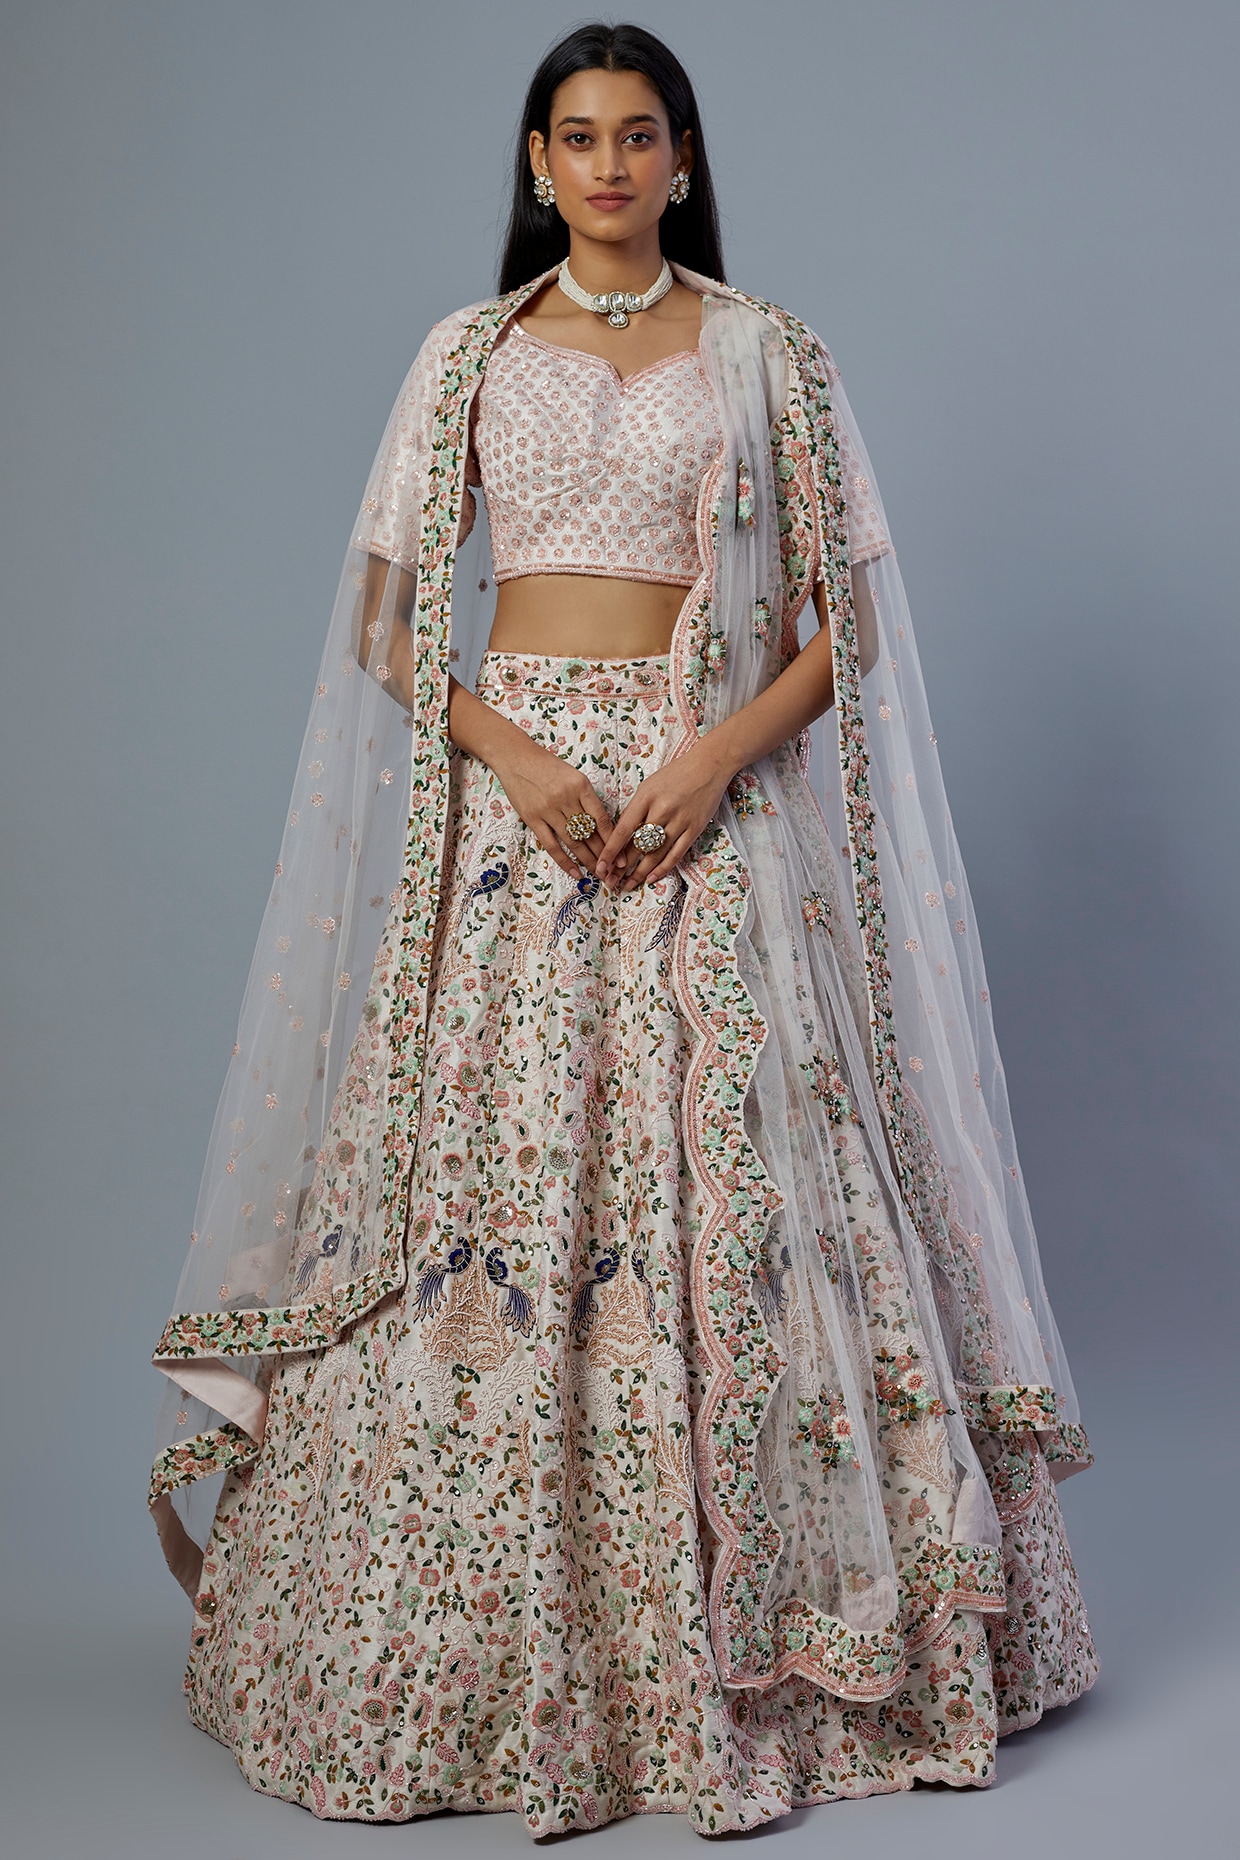 Designer Outfit for sisters | Outfit Ideas for bridesmaids | Indian Weddings  | Ind… | Indian wedding reception outfits, Indian wedding outfits, Indian wedding  dress